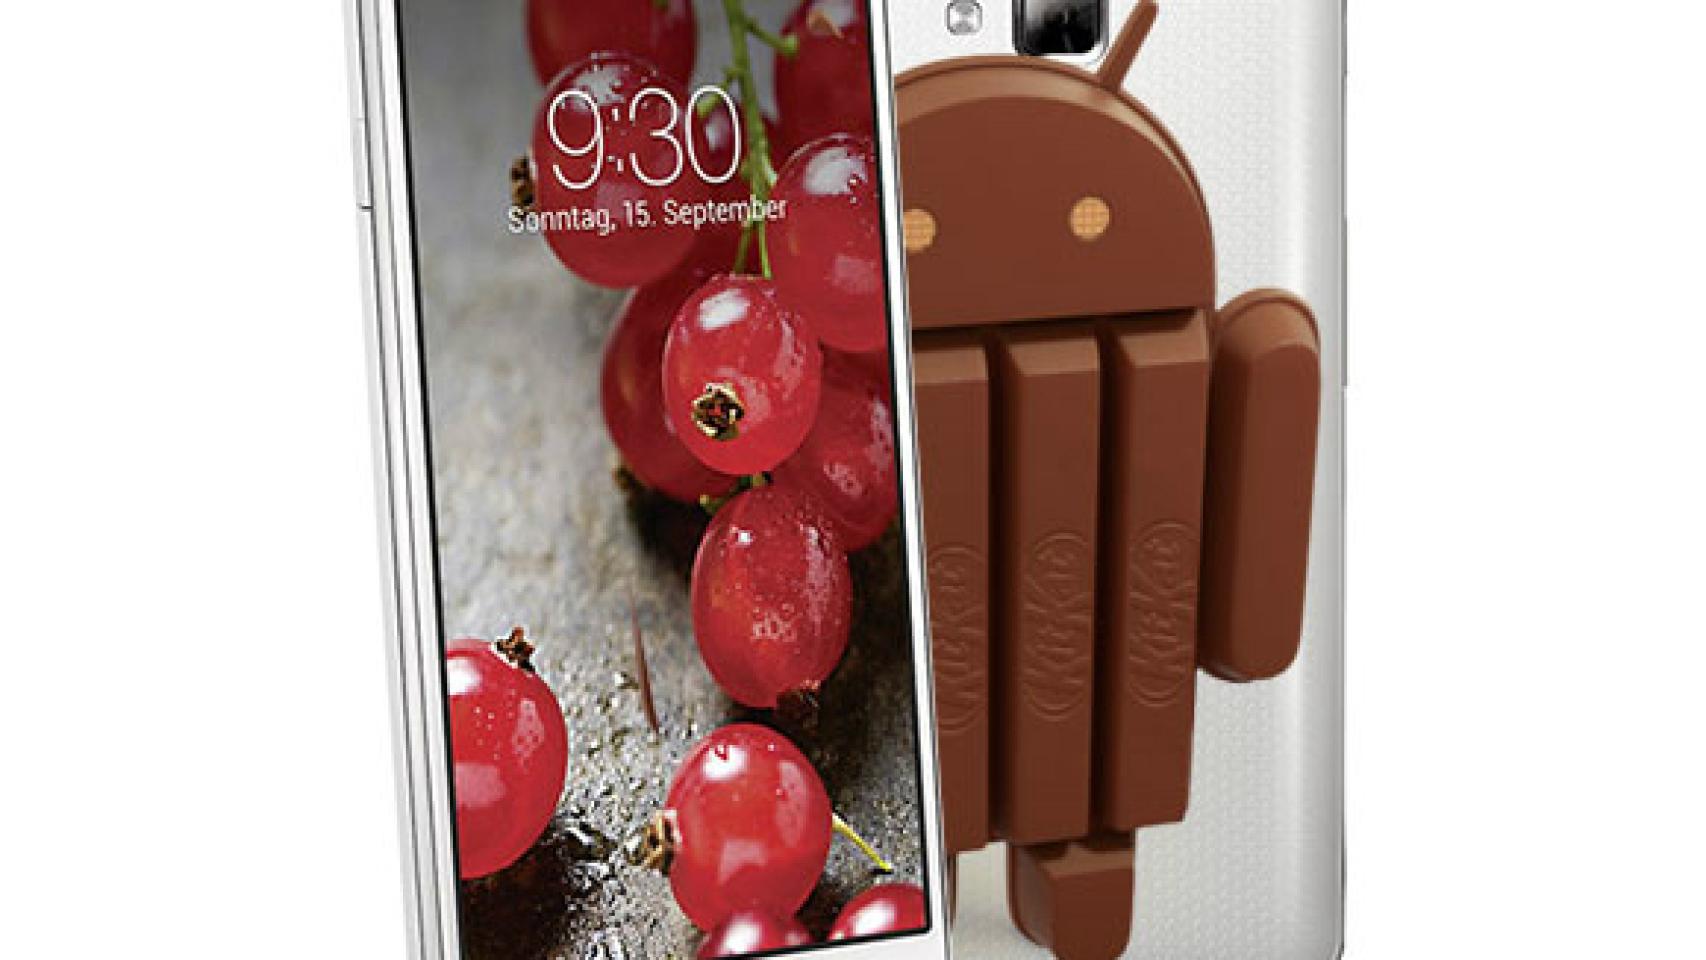 LG Optimus L9 II se actualiza a Android 4.4.2 KitKat